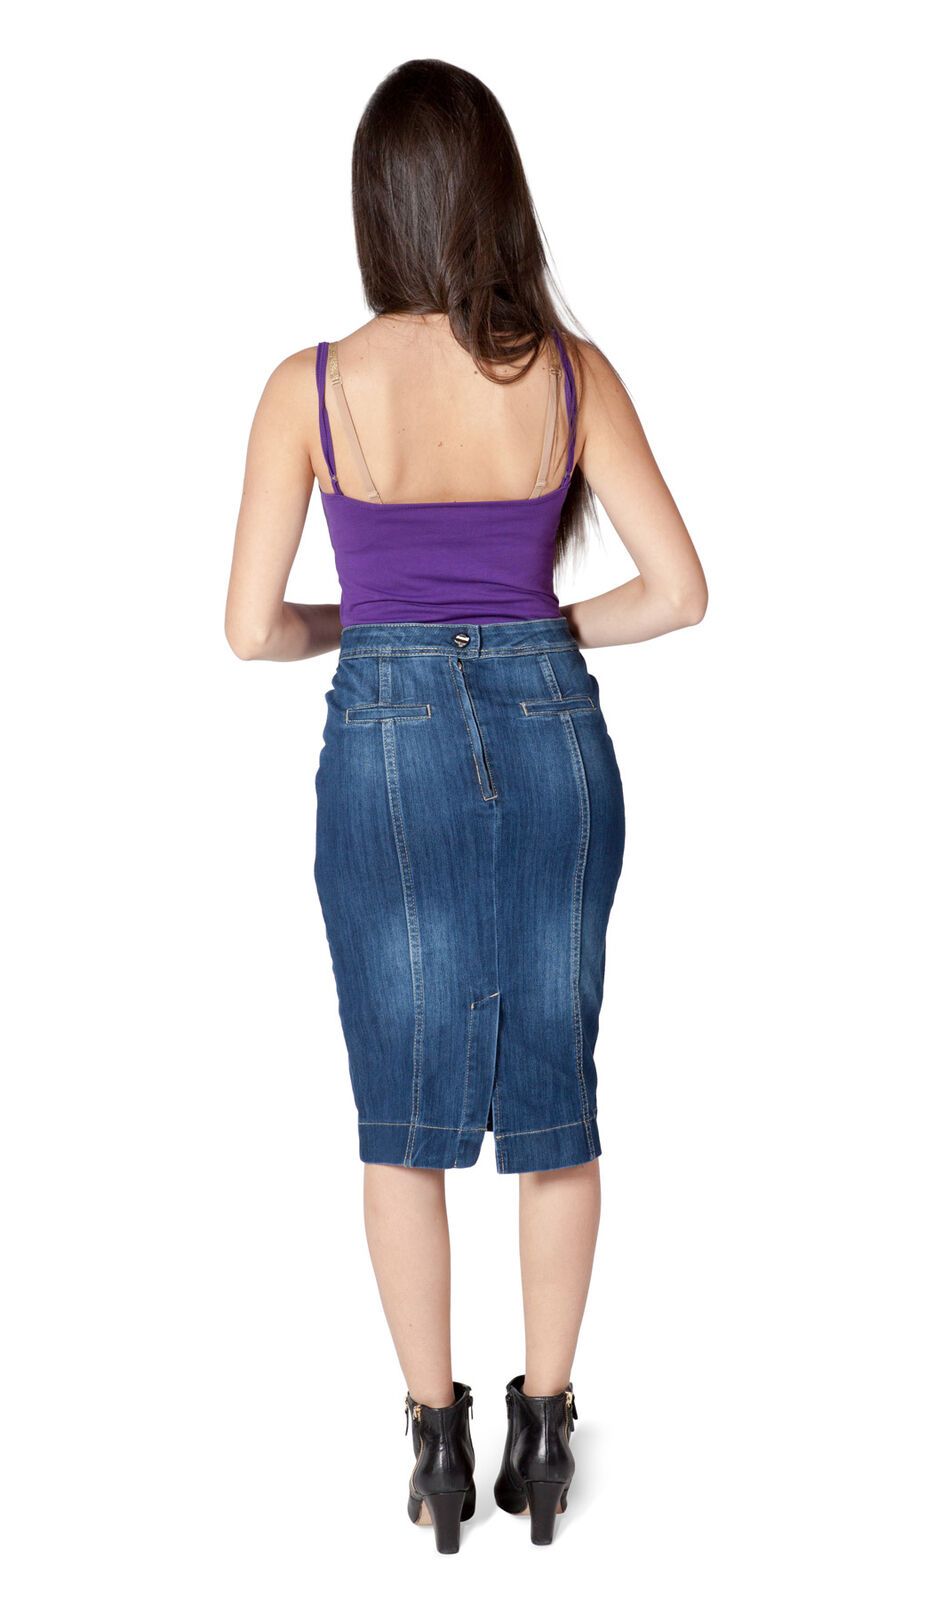 Full-length back view of knee-length, blue denim skirt showing back button and zip.